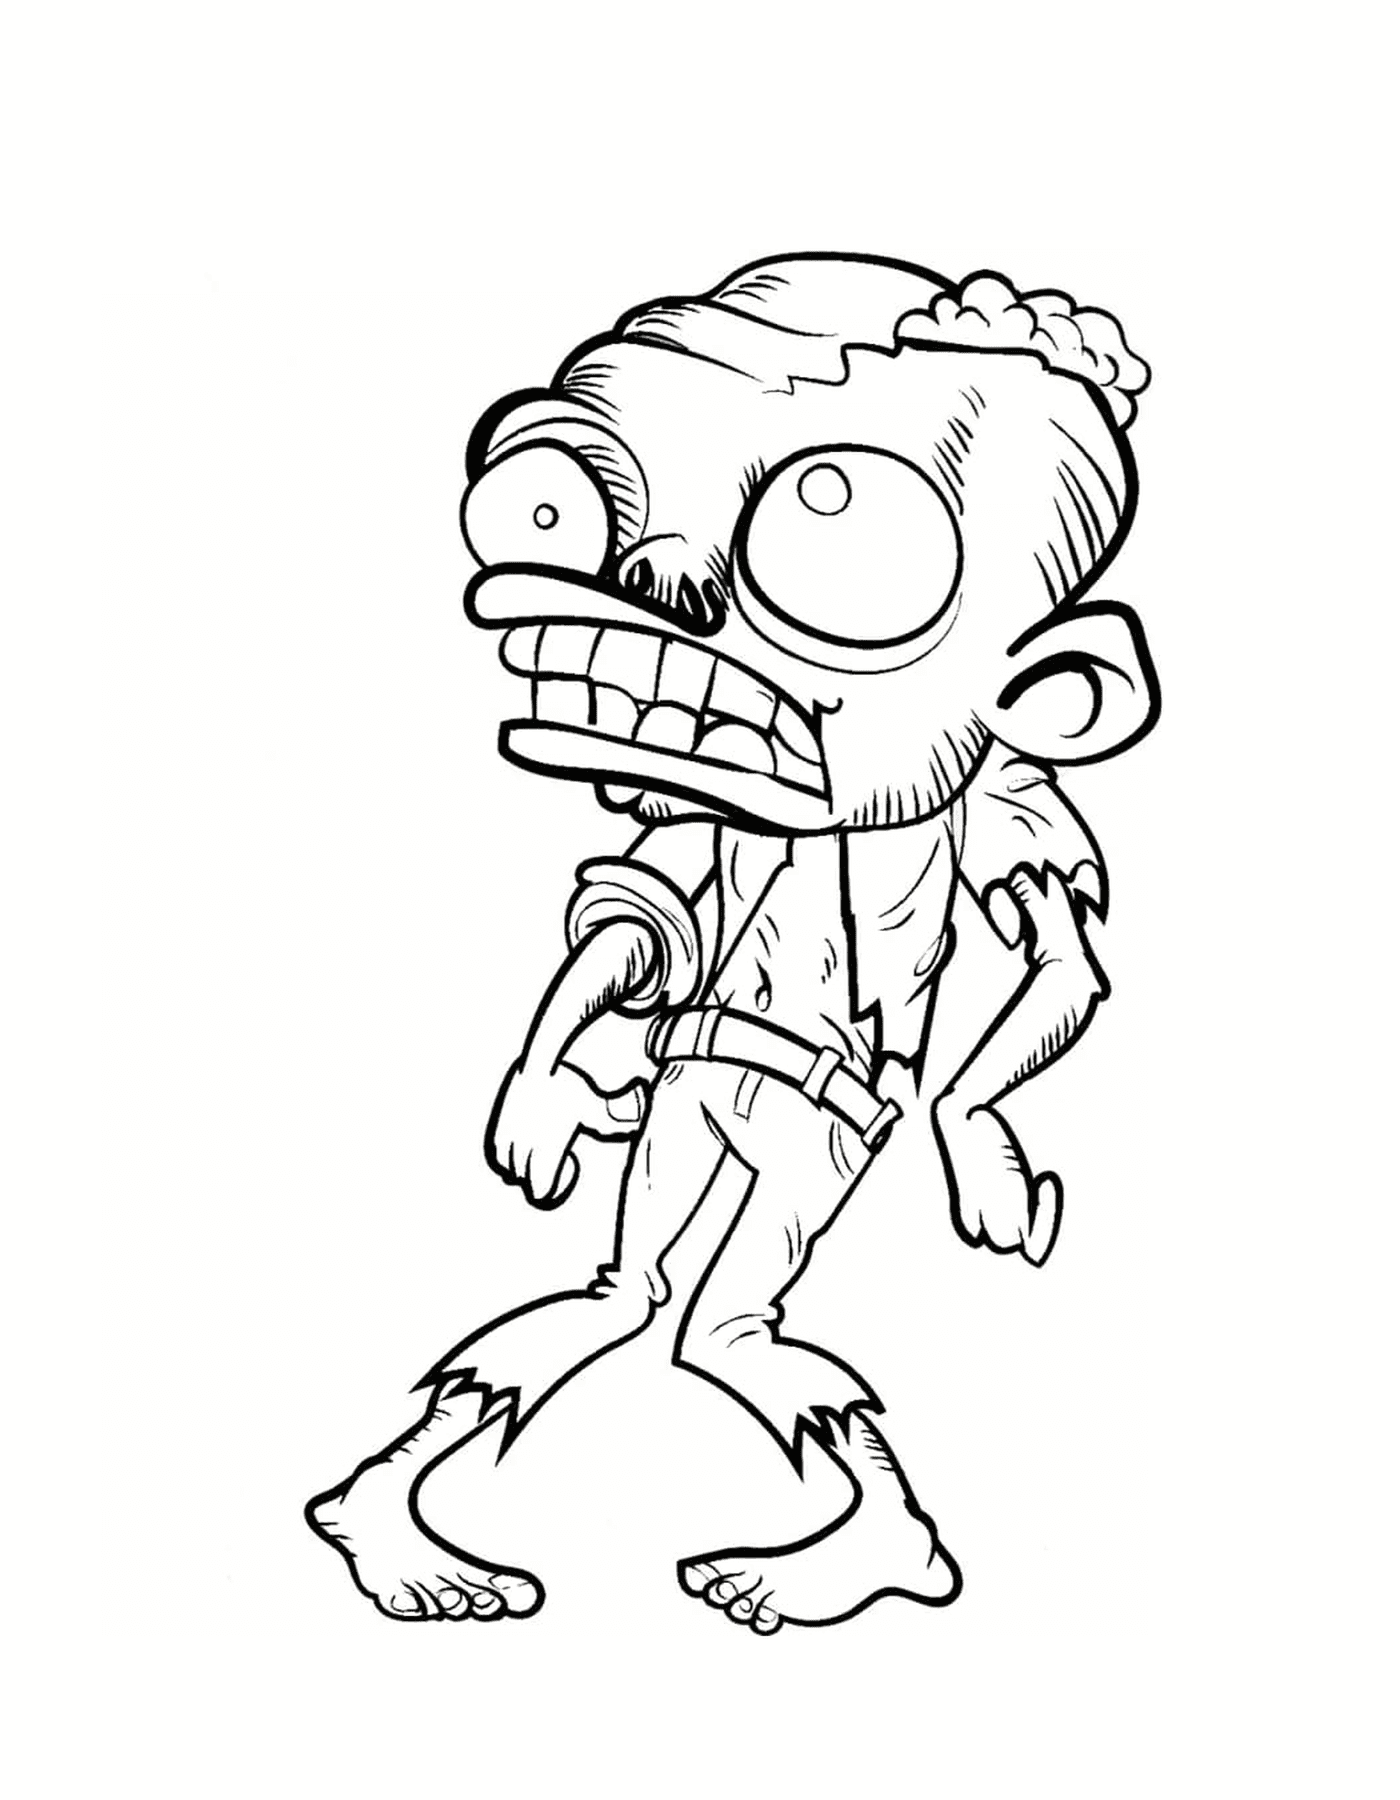  A really ugly zombie 